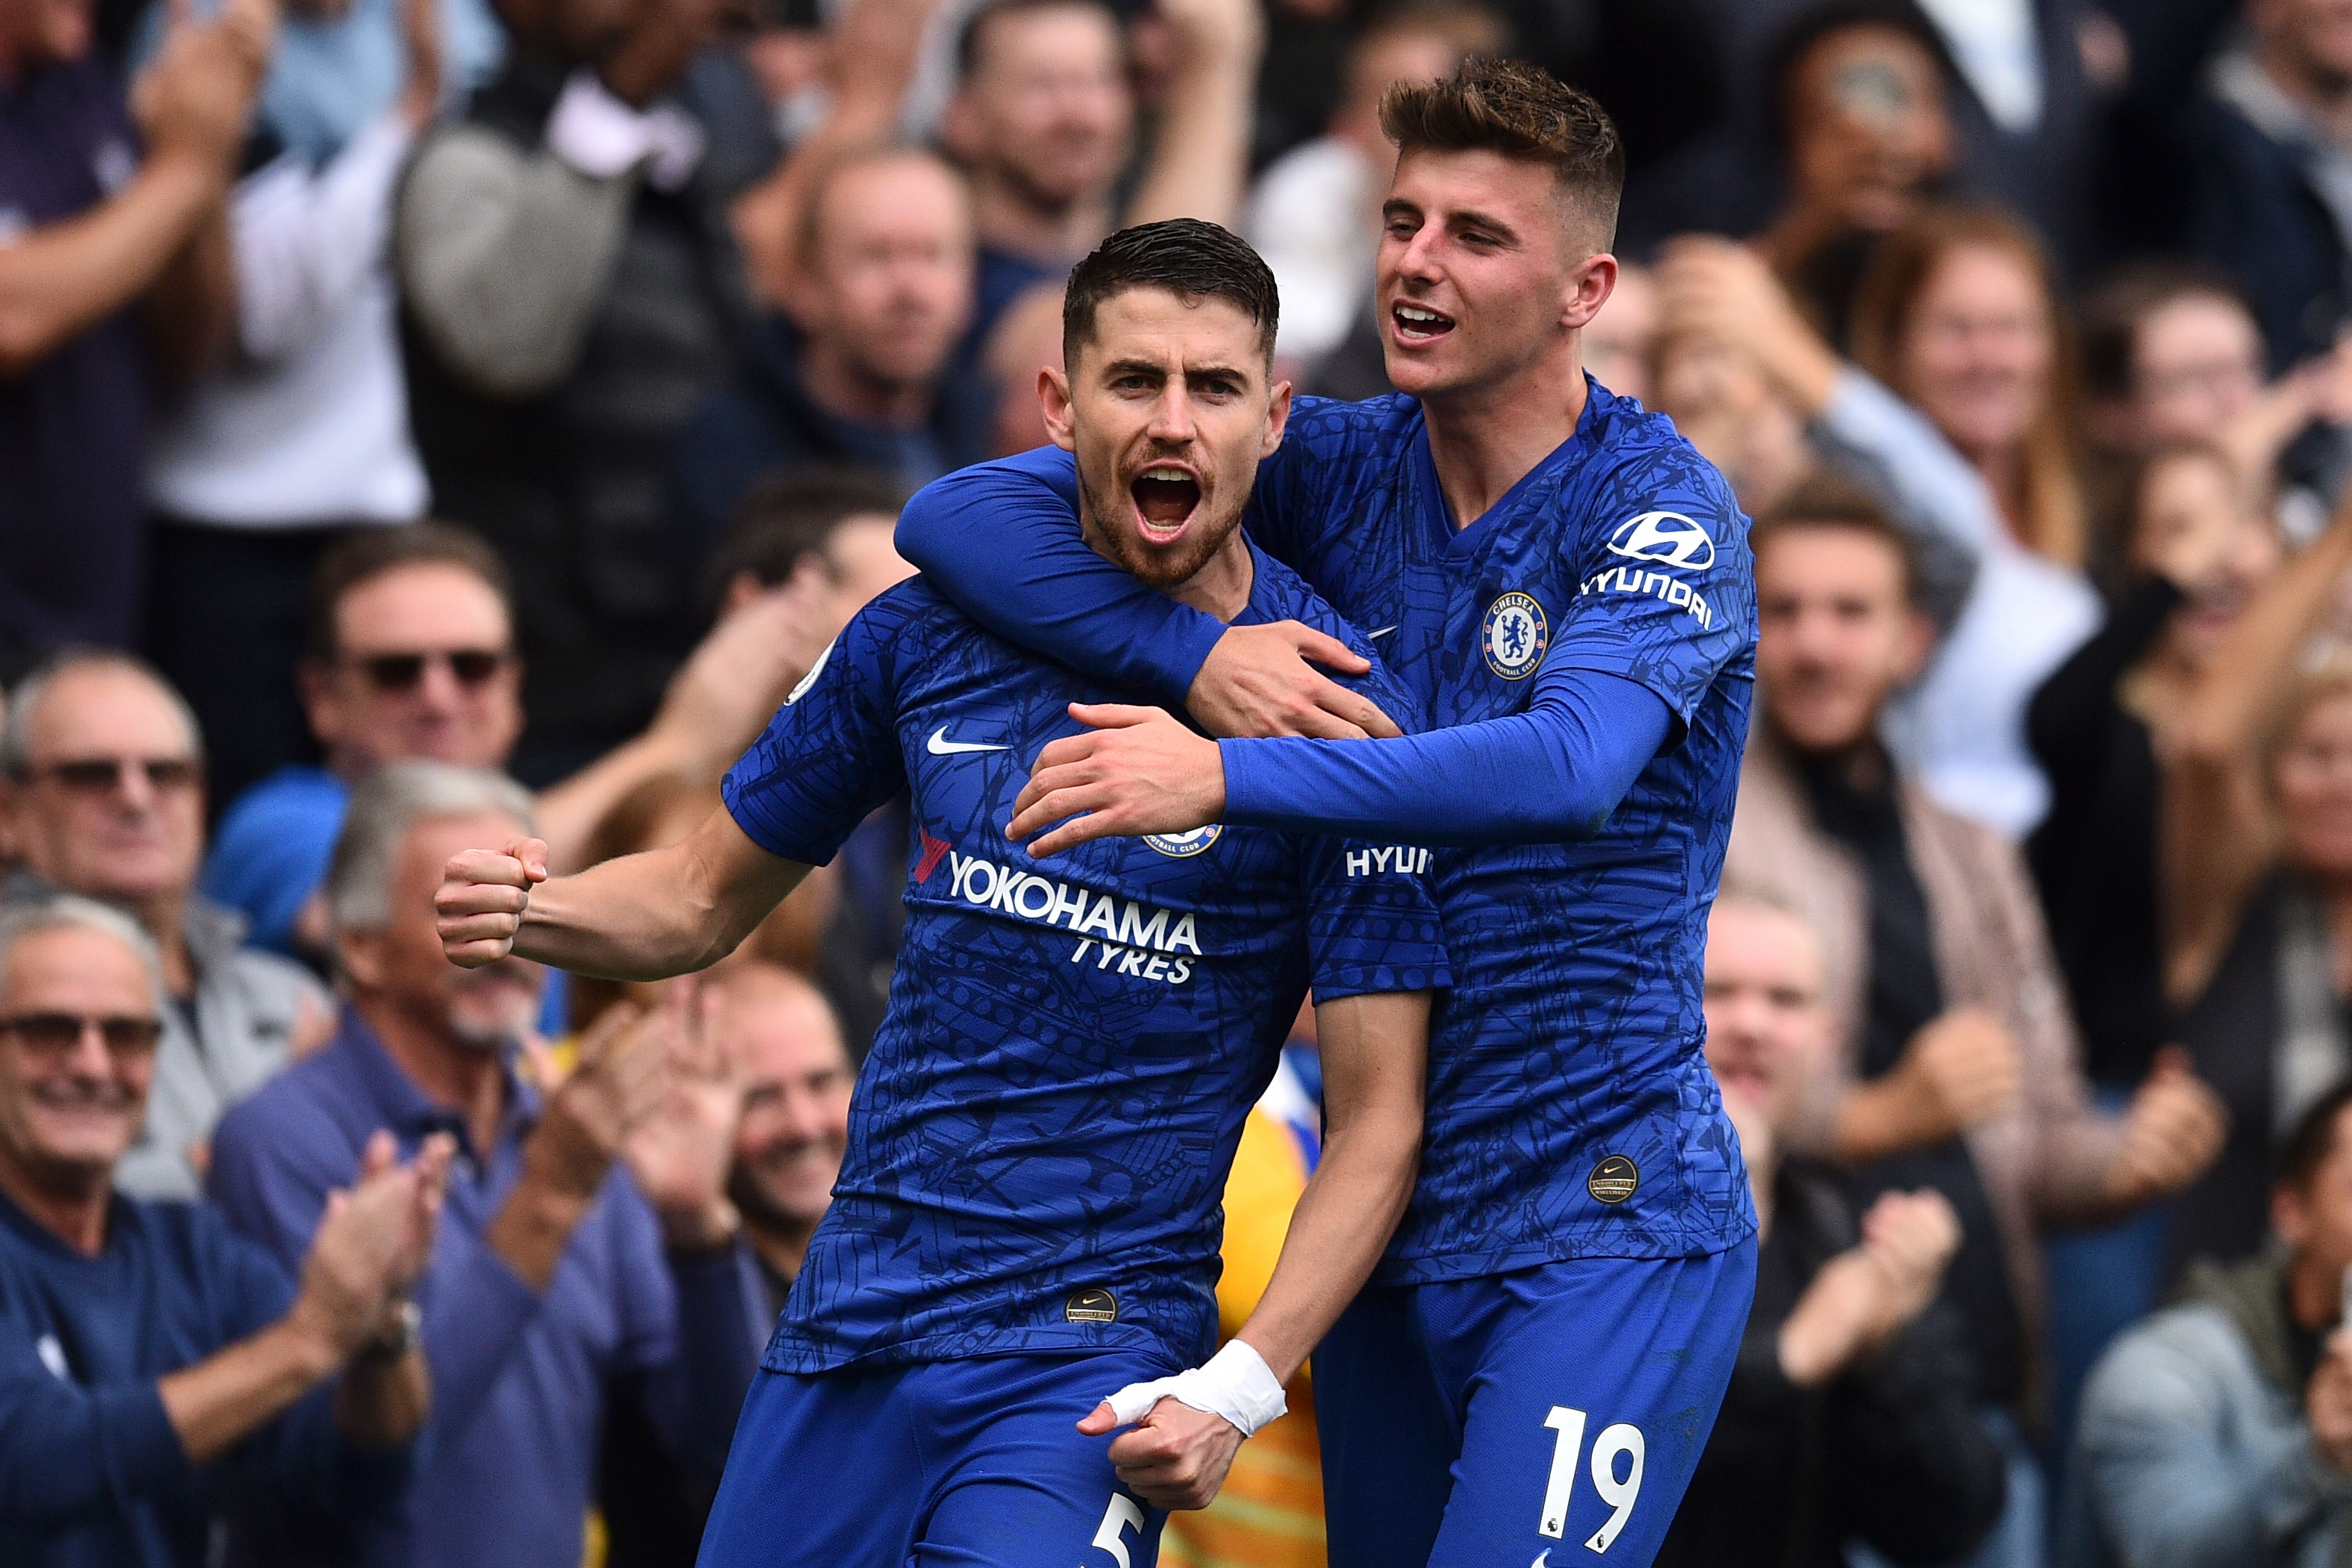 Chelsea's Italian midfielder Jorginho (L) celebrates scoring the opening goal from the penalty spot with Chelsea's English midfielder Mason Mount (R) during the English Premier League football match between Chelsea and Brighton and Hove Albion at Stamford Bridge in London on September 28, 2019. (Photo by Glyn KIRK / AFP) / RESTRICTED TO EDITORIAL USE. No use with unauthorized audio, video, data, fixture lists, club/league logos or 'live' services. Online in-match use limited to 120 images. An additional 40 images may be used in extra time. No video emulation. Social media in-match use limited to 120 images. An additional 40 images may be used in extra time. No use in betting publications, games or single club/league/player publications. /         (Photo credit should read GLYN KIRK/AFP via Getty Images)